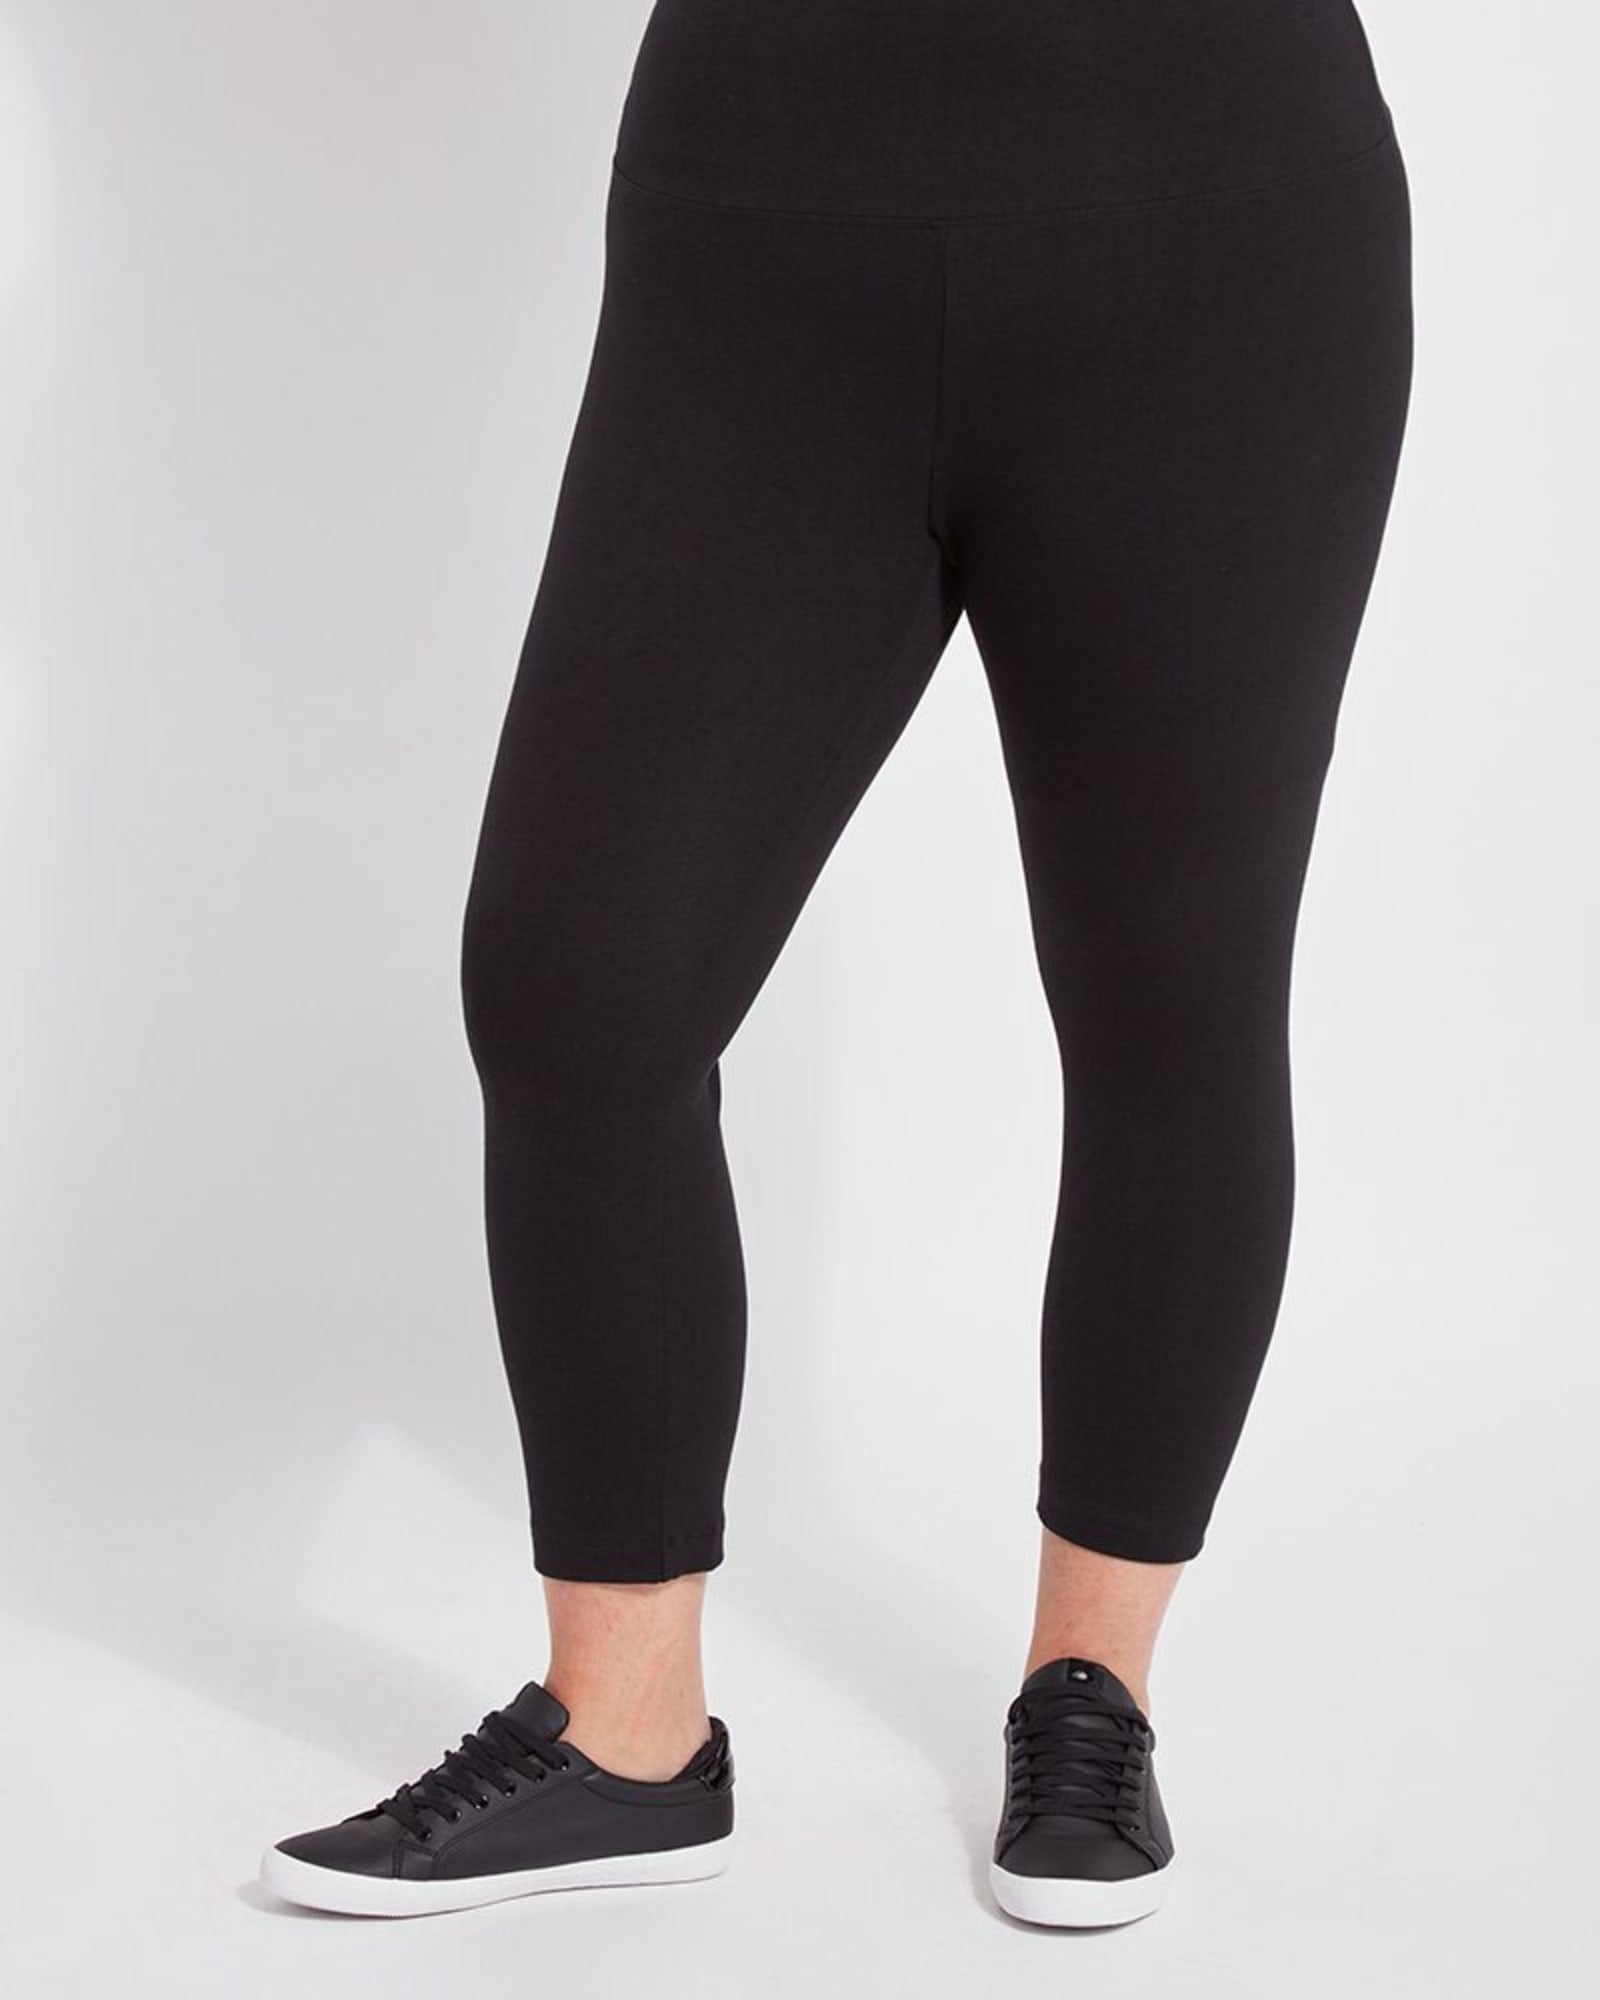 Plus Size Yoga Pants With Pockets